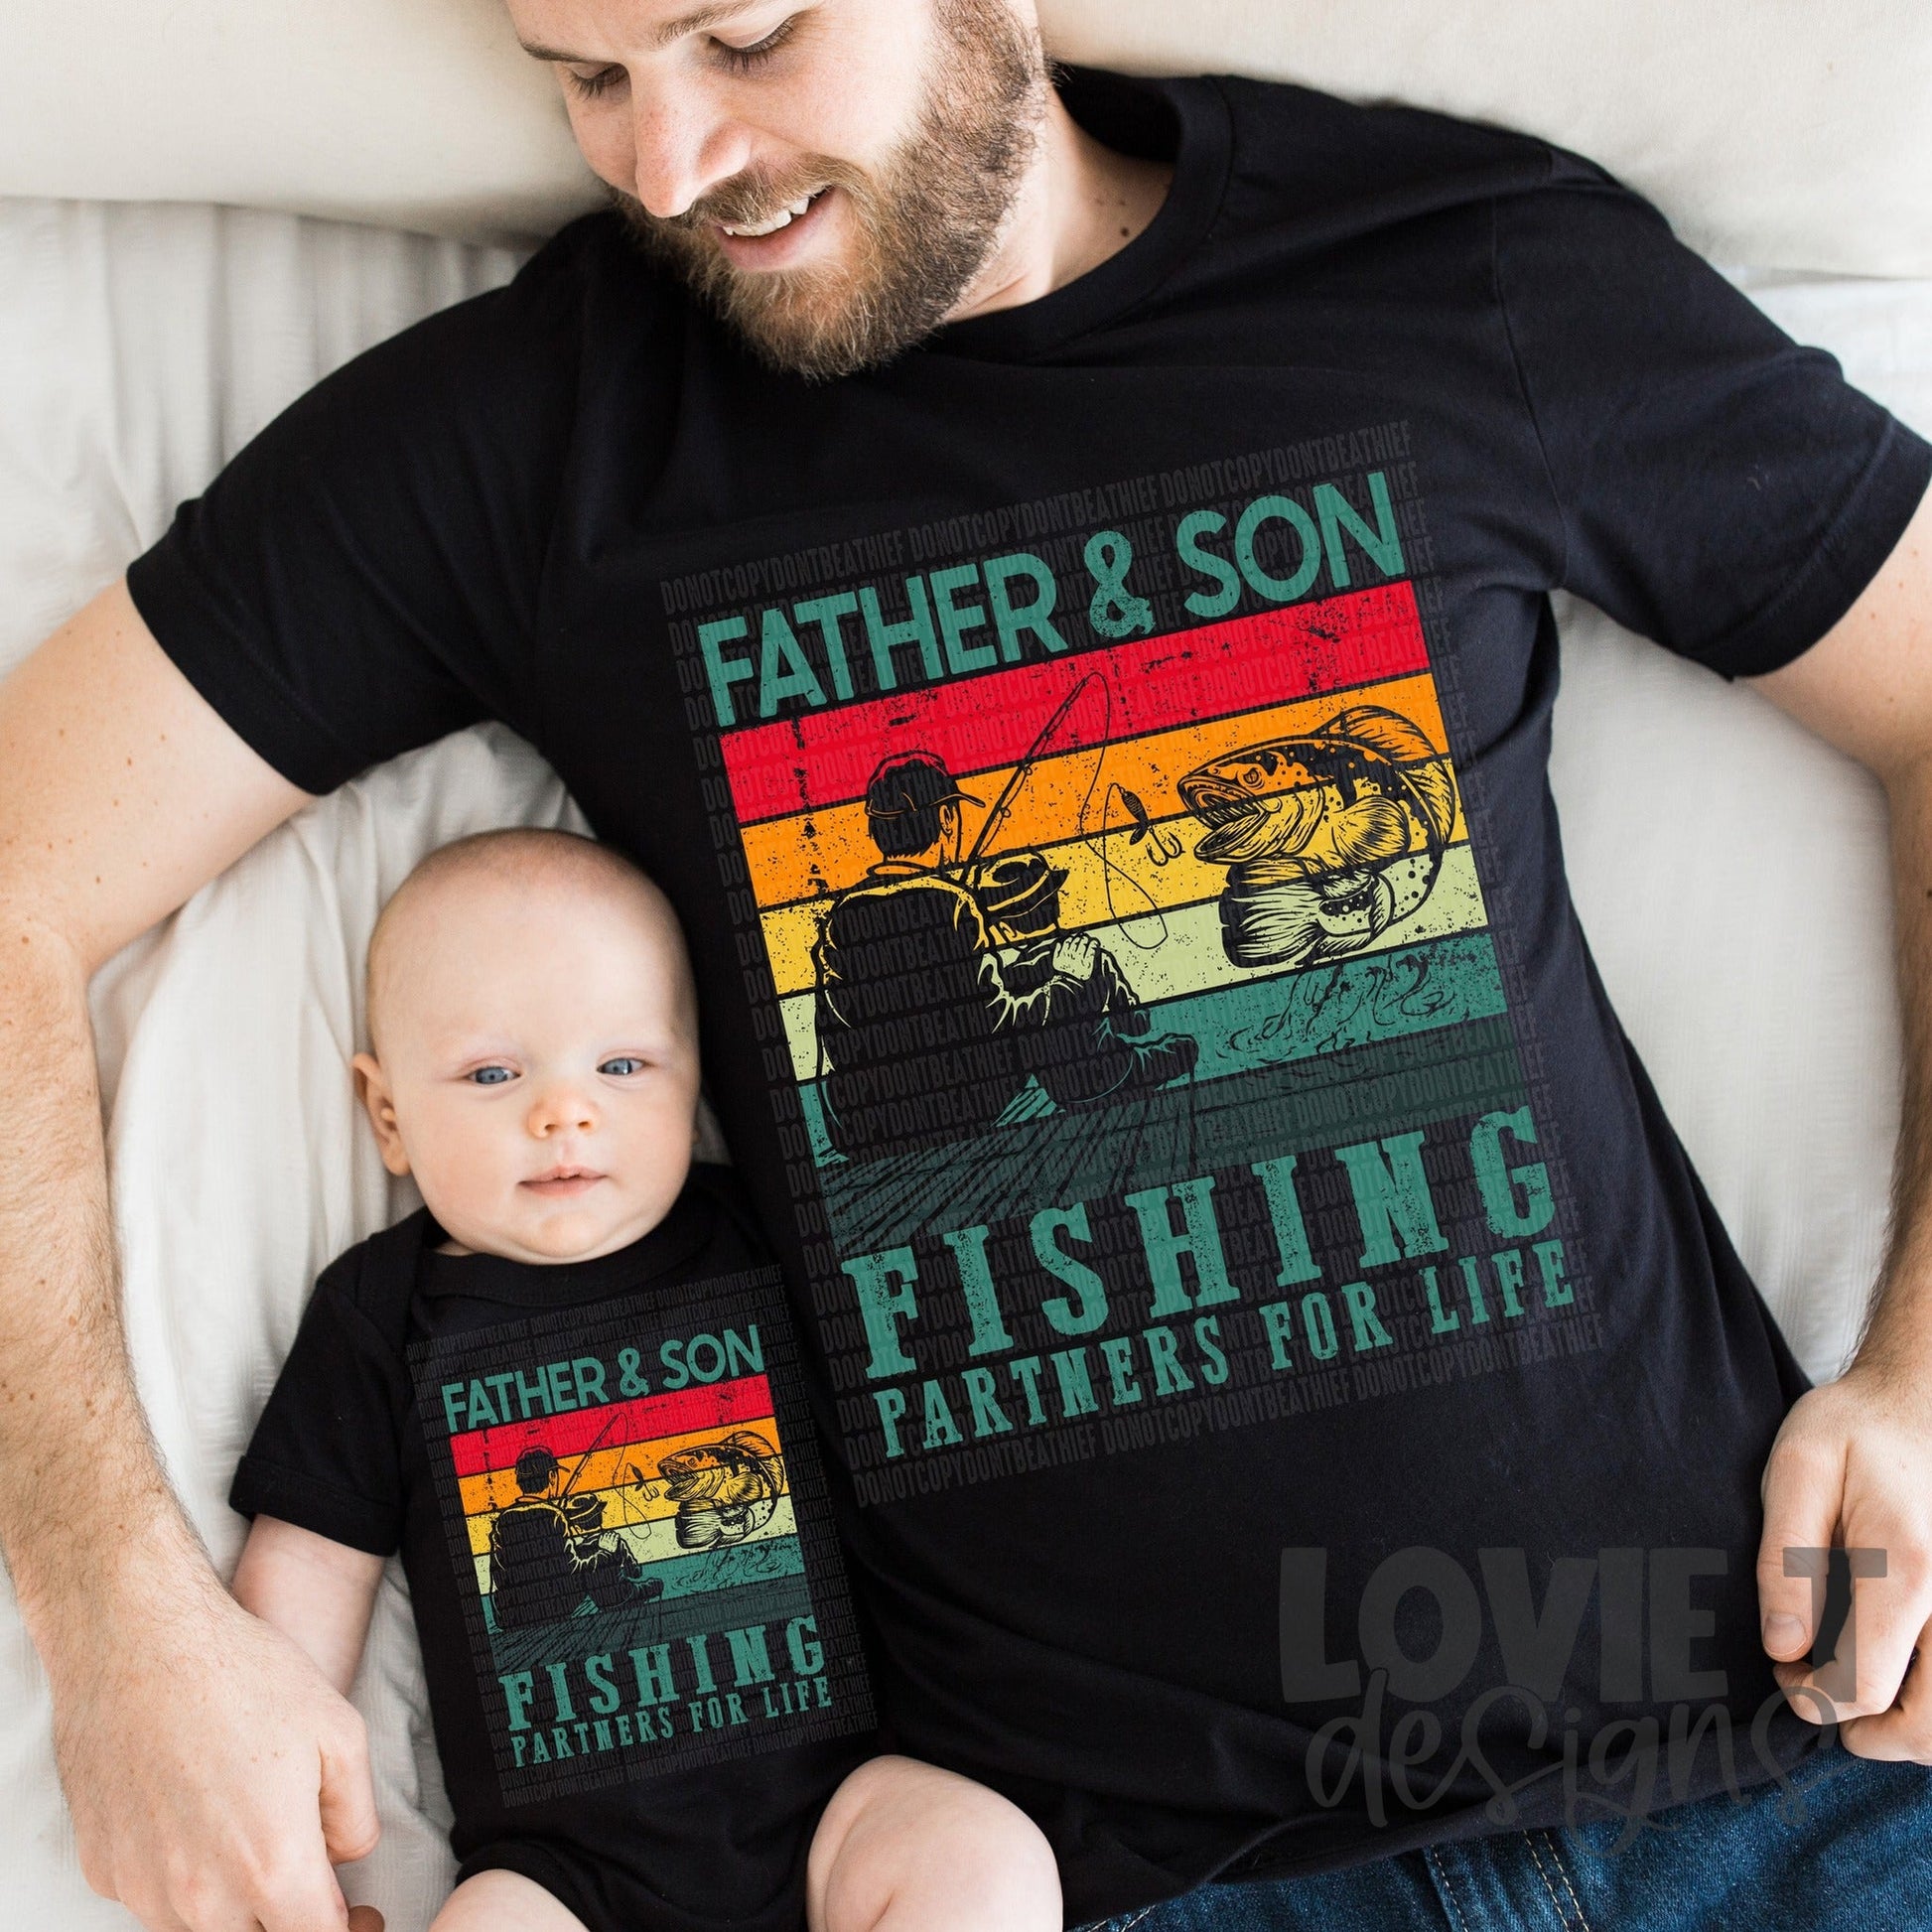 Father & Son Fishing Partners For Life